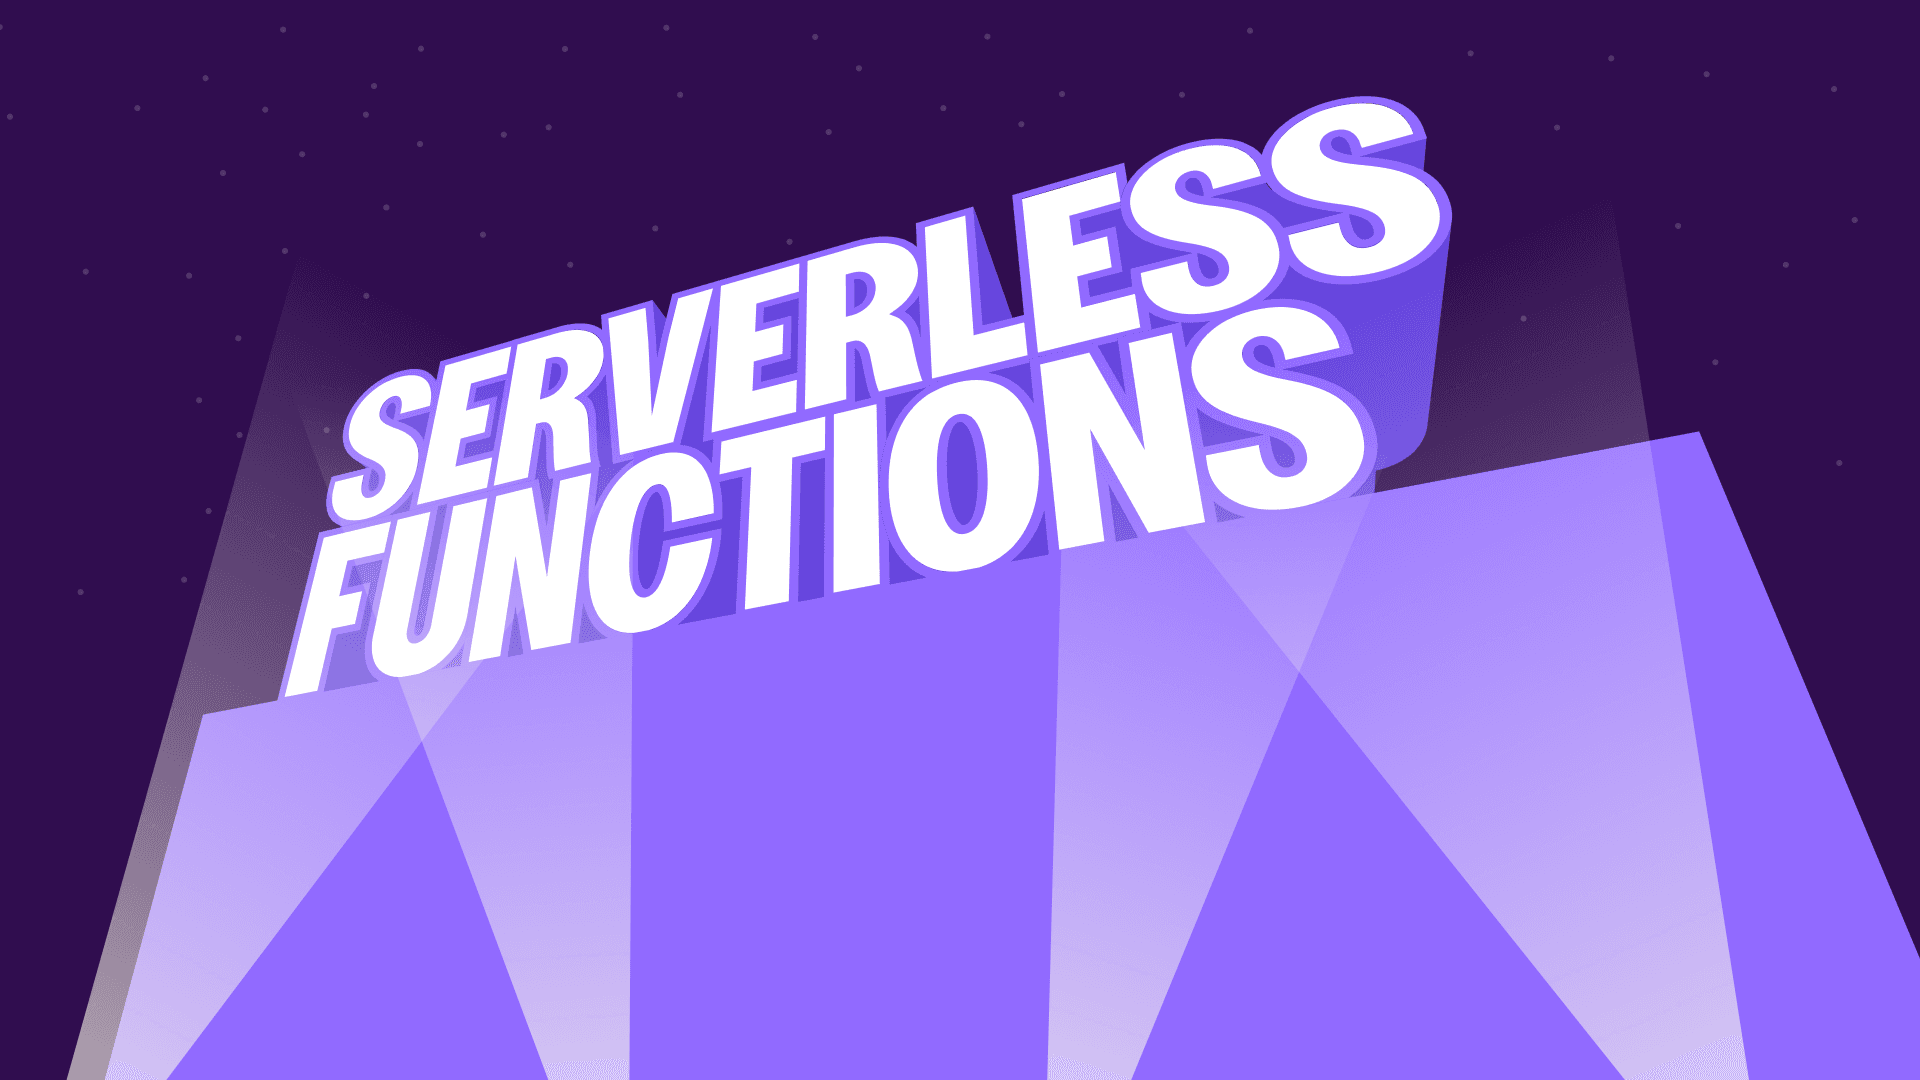 pusher-serverless-functions-release-announcement